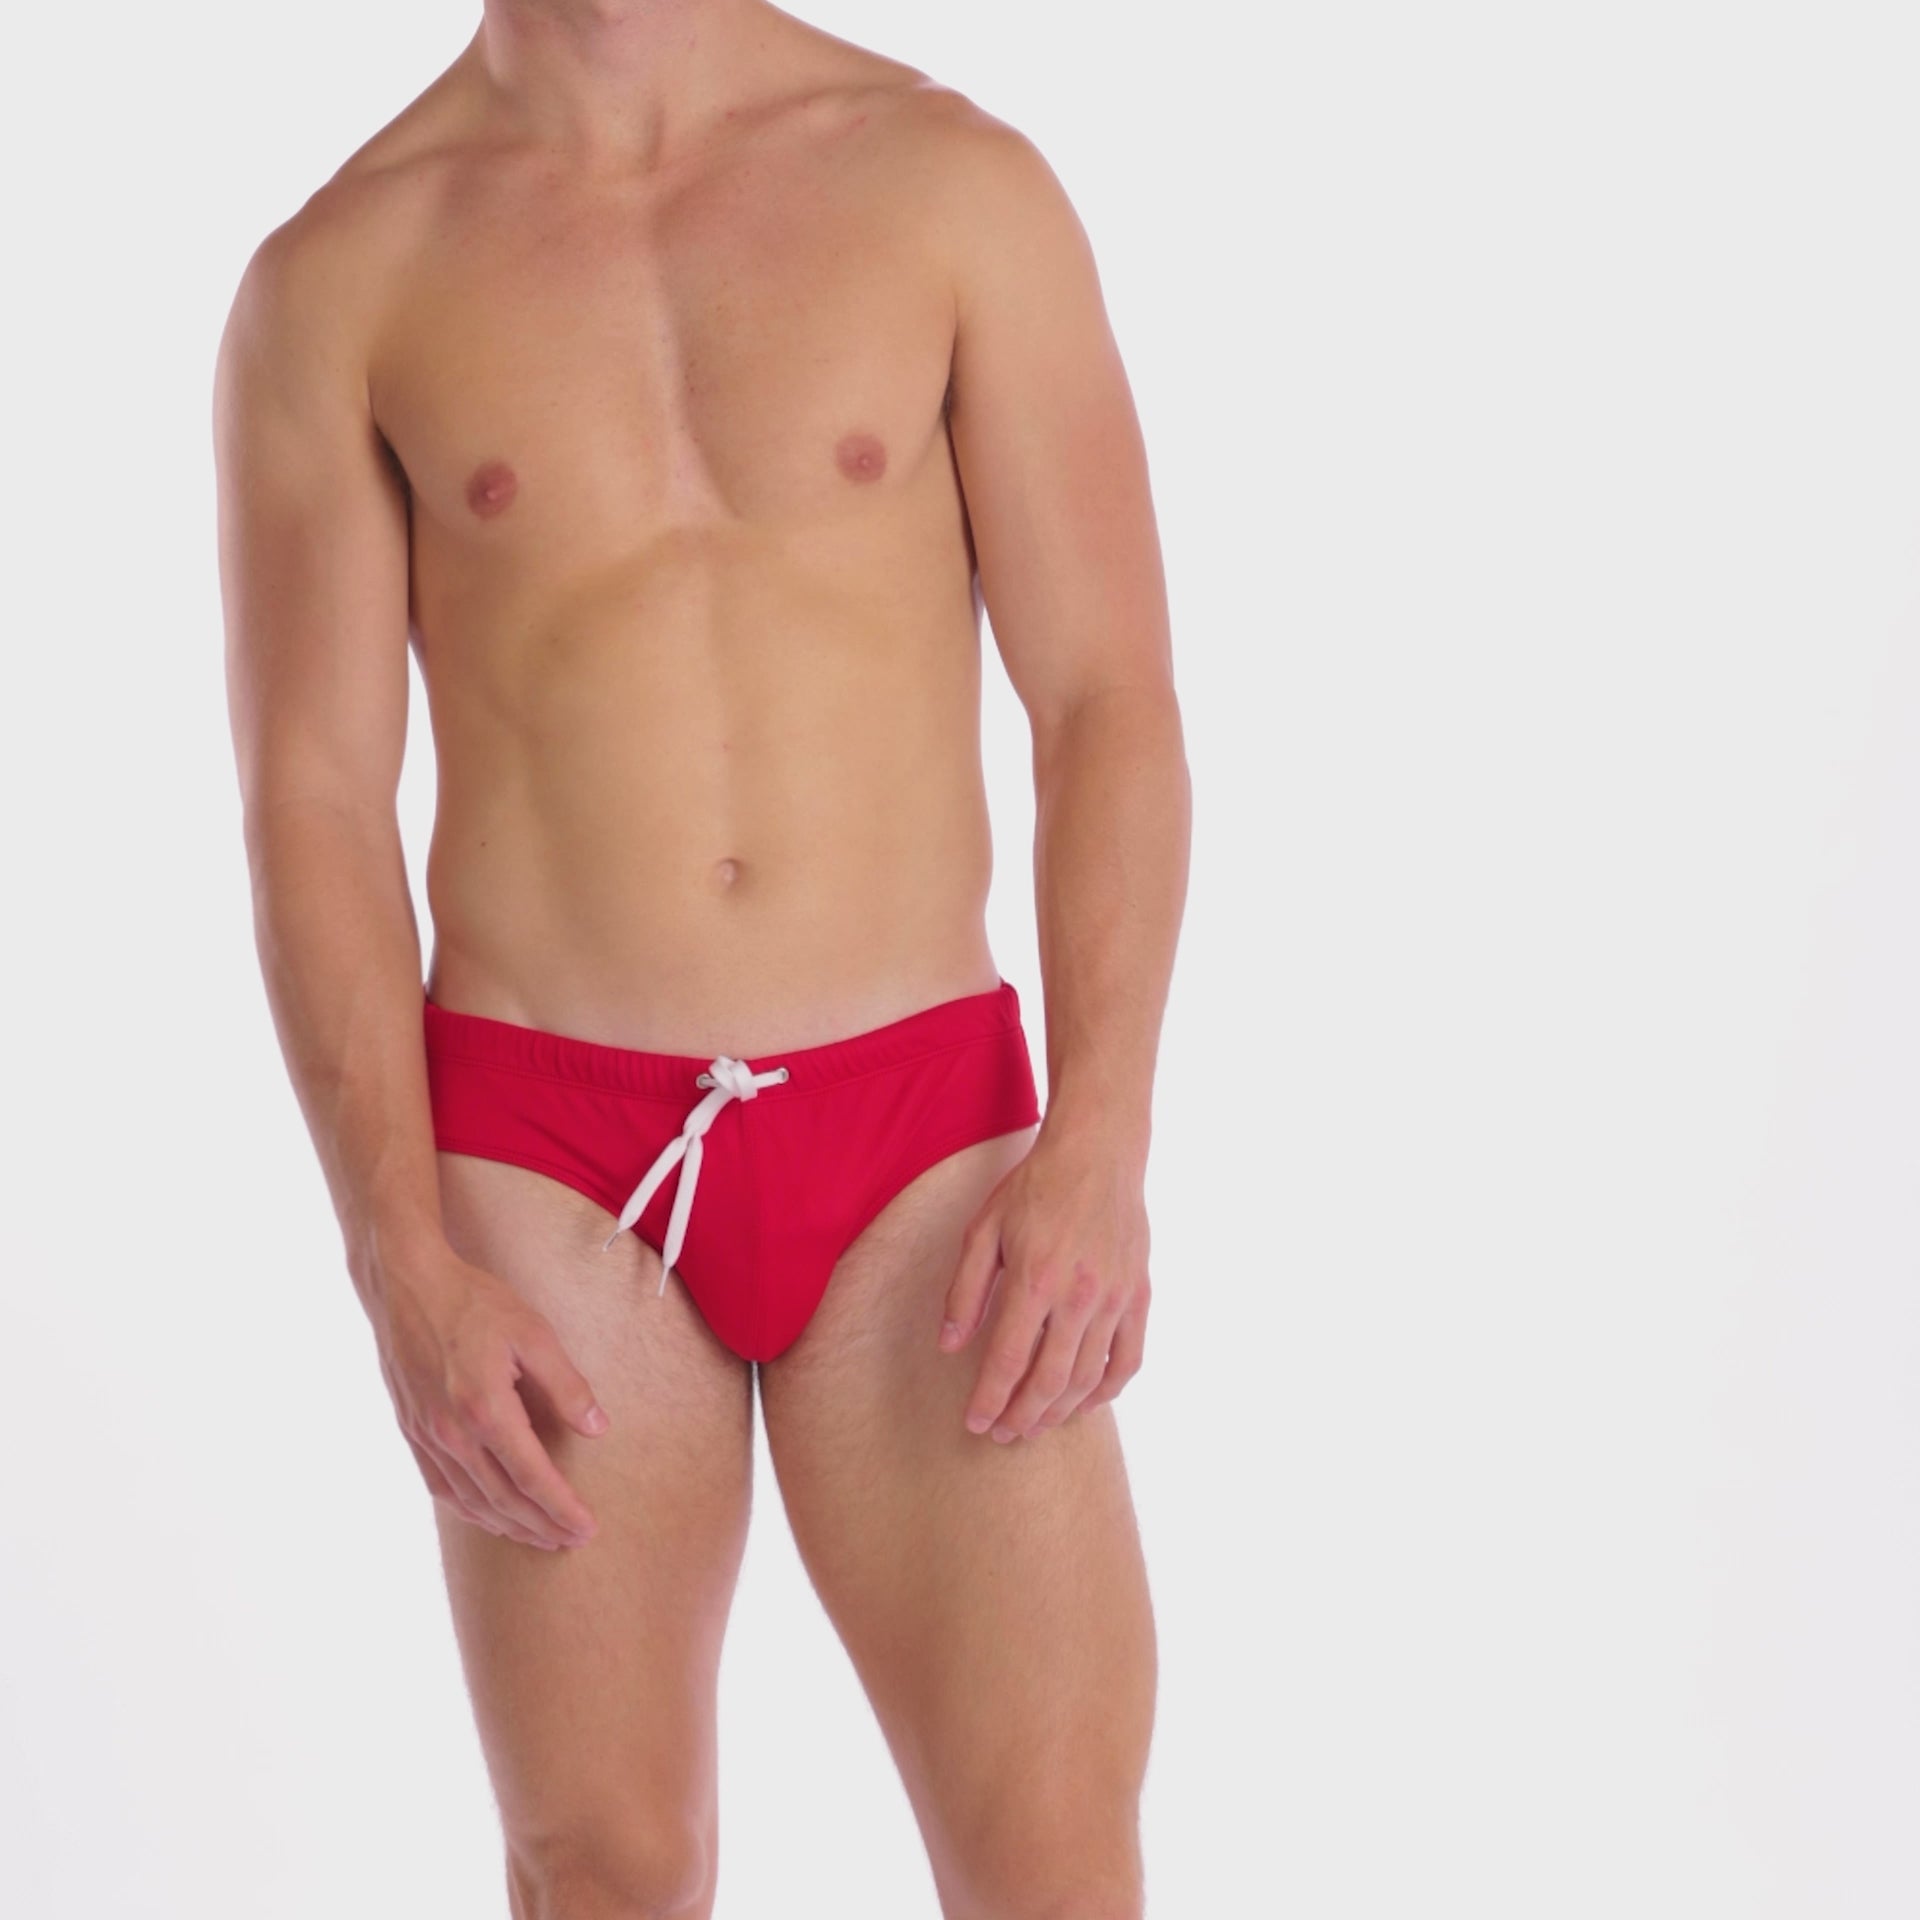 A WHITE WALL VIDEO OF A MALE MODEL WEARING A SAMMY SHOP MEN'S CHERRY ECO SWIM BRIEF